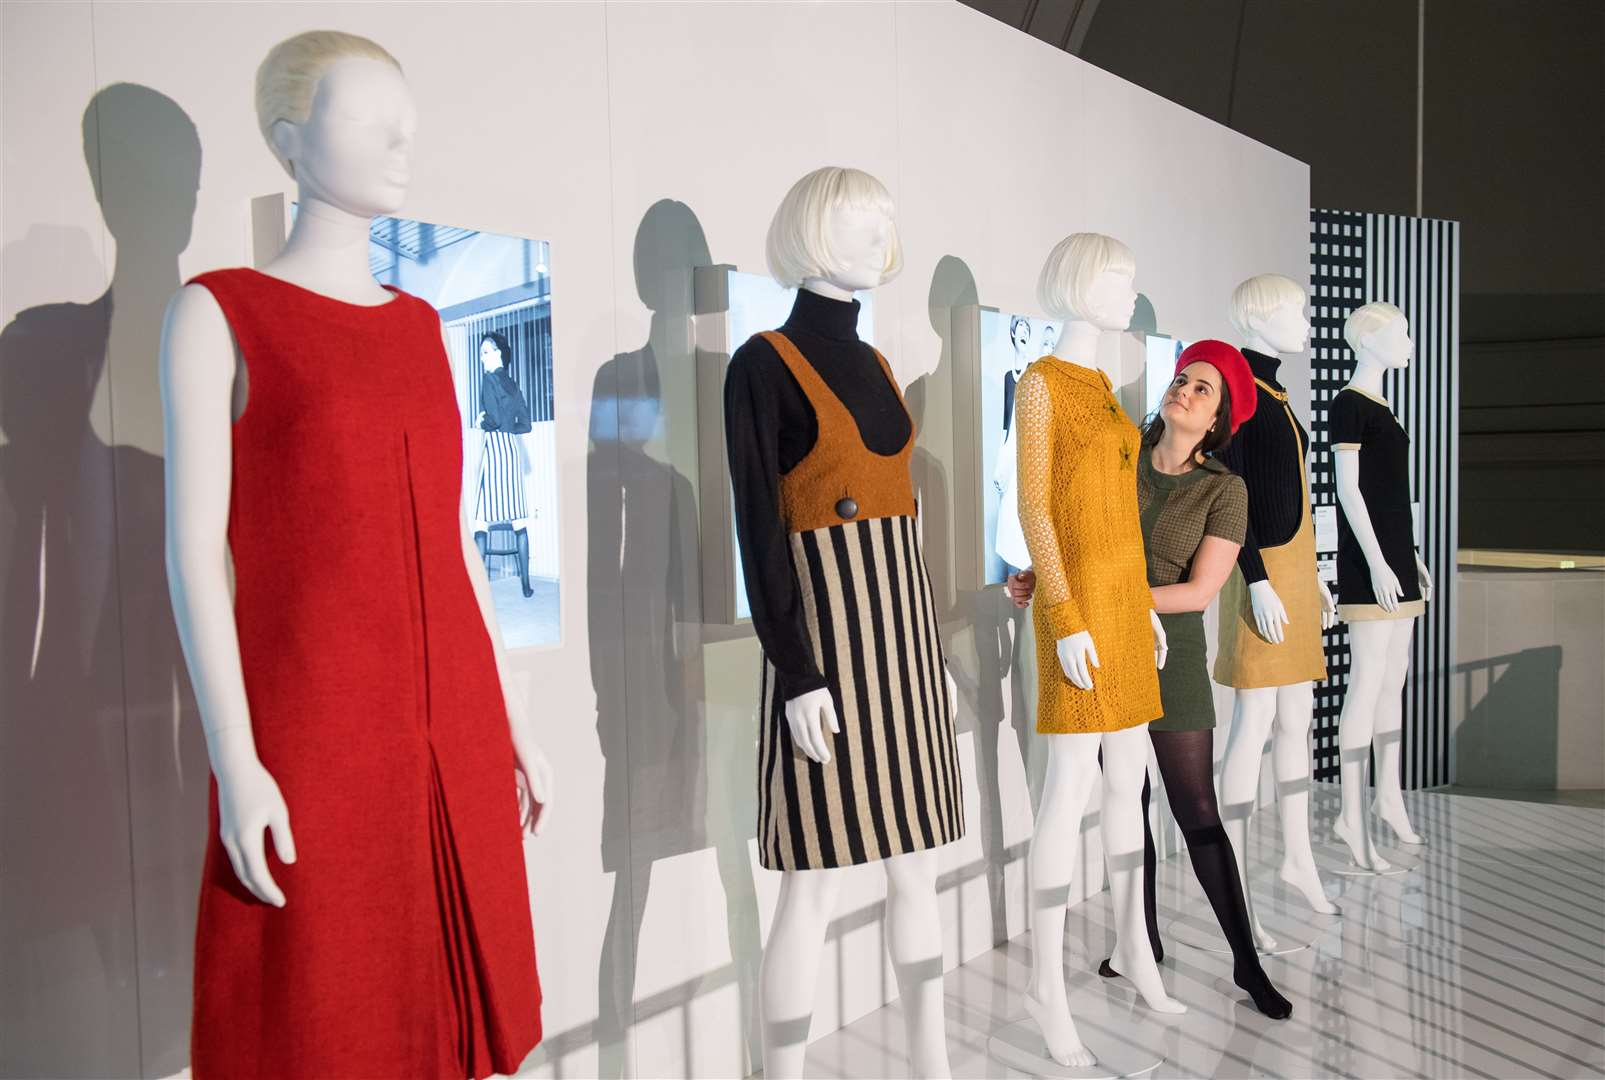 Dame Mary Quant’s designs helped bring mini skirts into the mainstream (Dominic Lipinski/PA)